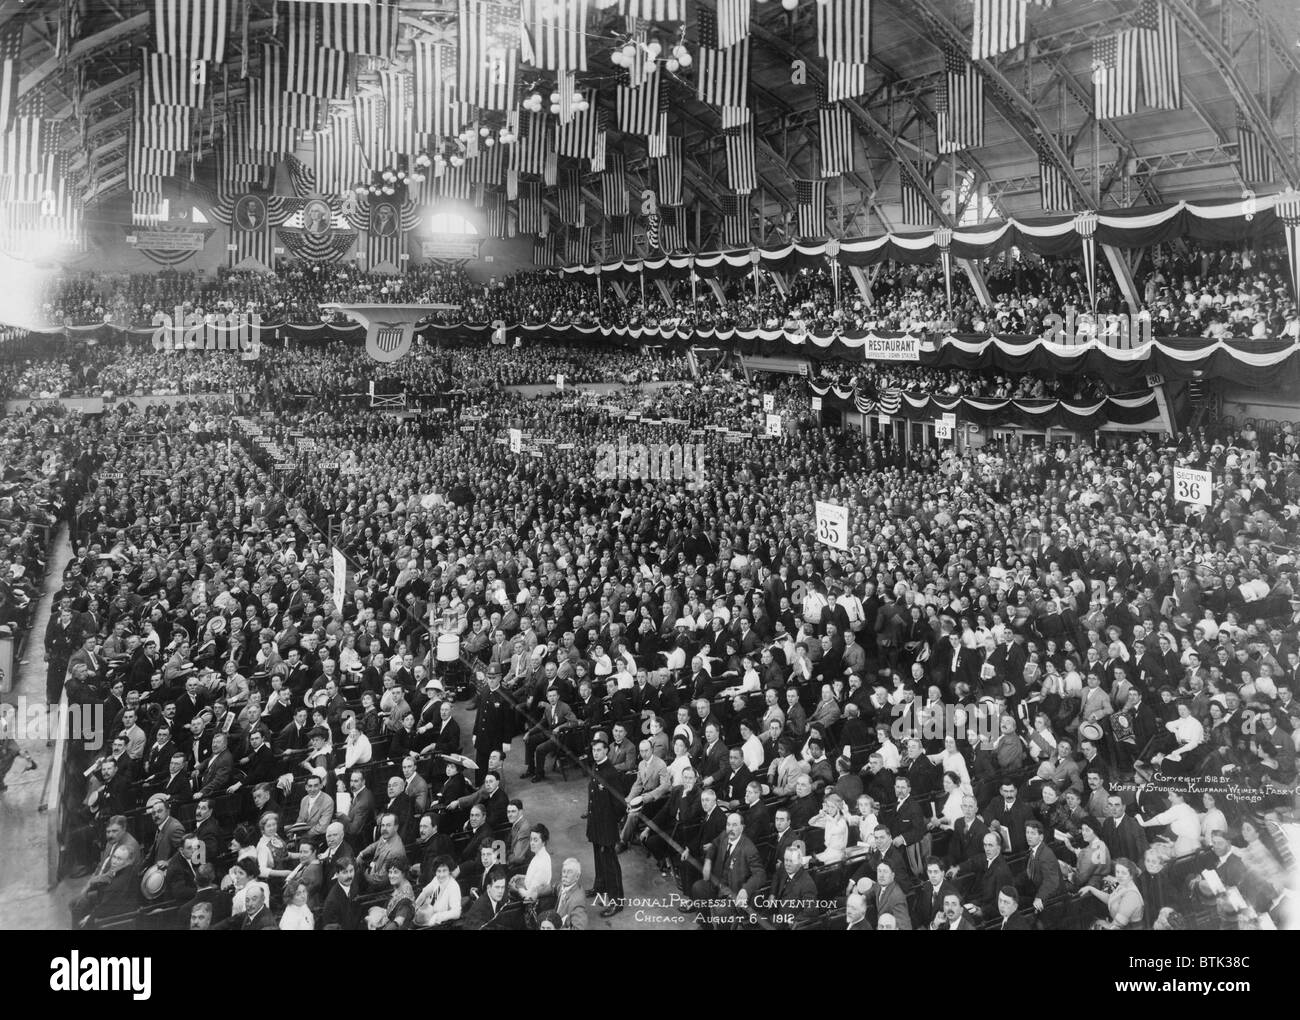 1912 National Progressive Convention nominated ex-President Theodore Roosevelt, whose third party candidacy split the Republican vote resulting in the election of Democratic Woodrow Wilson. Broad view of convention delegates in Chicago. 1912 Stock Photo